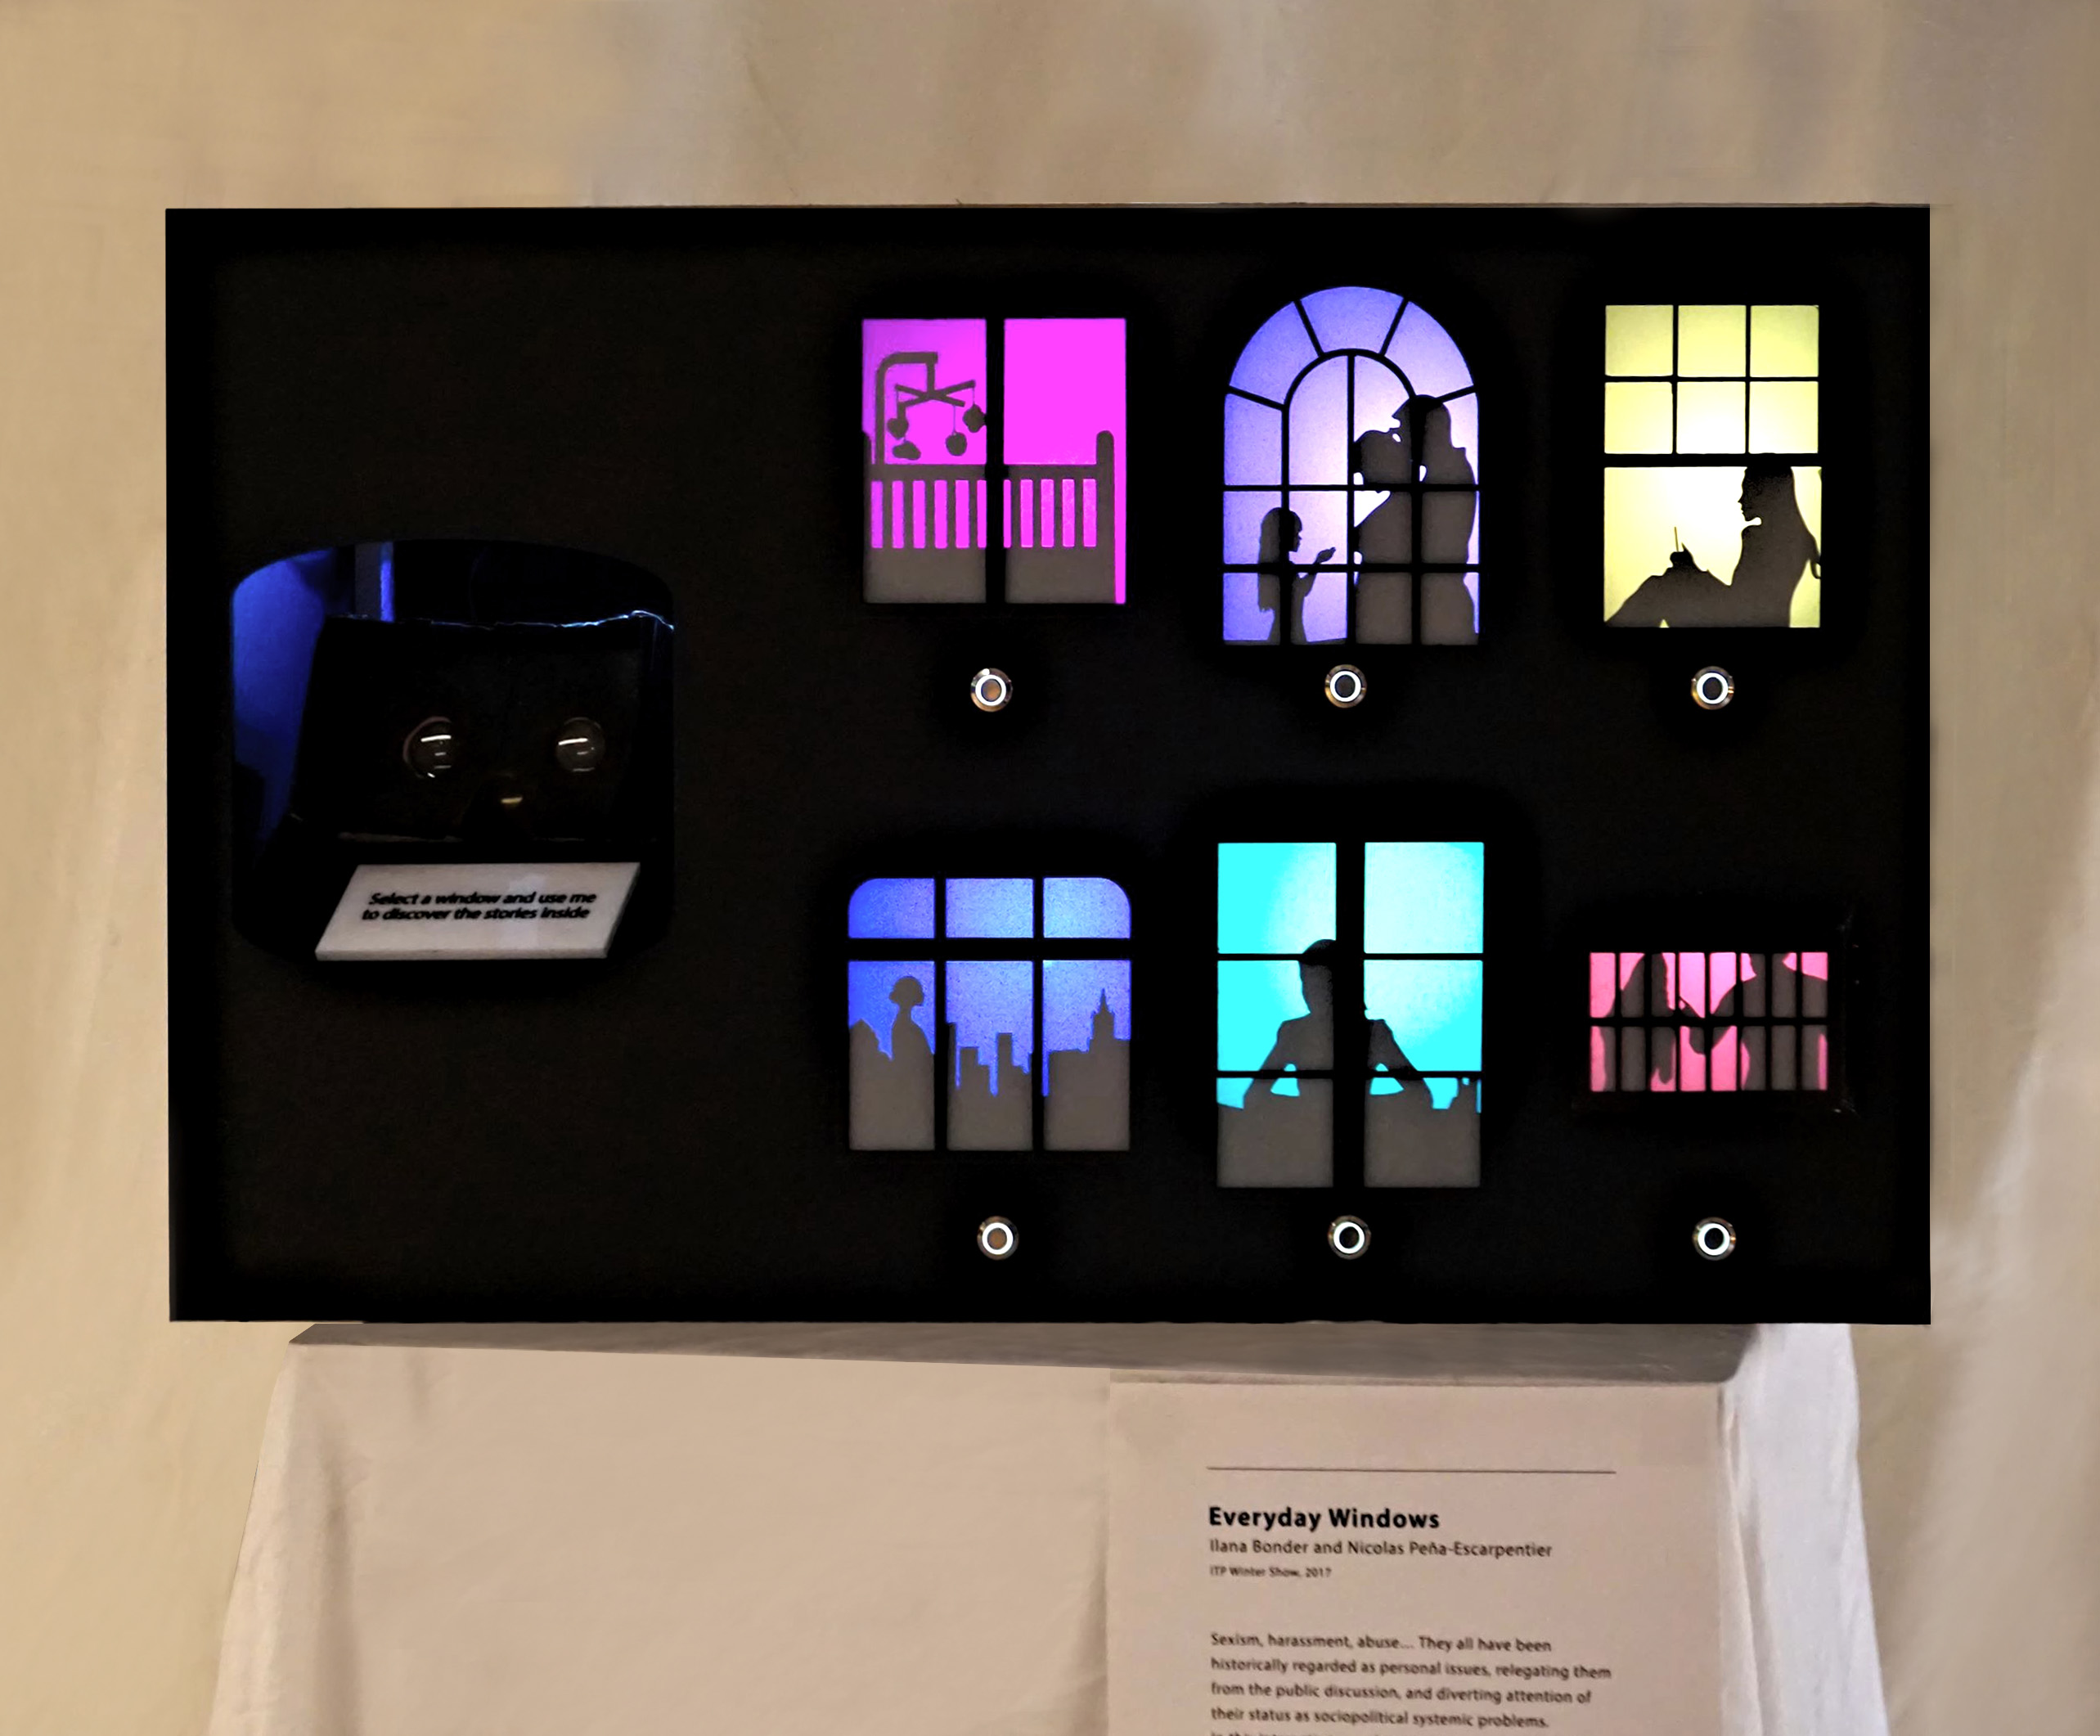 Everyday Windows physical controller, a dollhouse with six windows and a button for each one